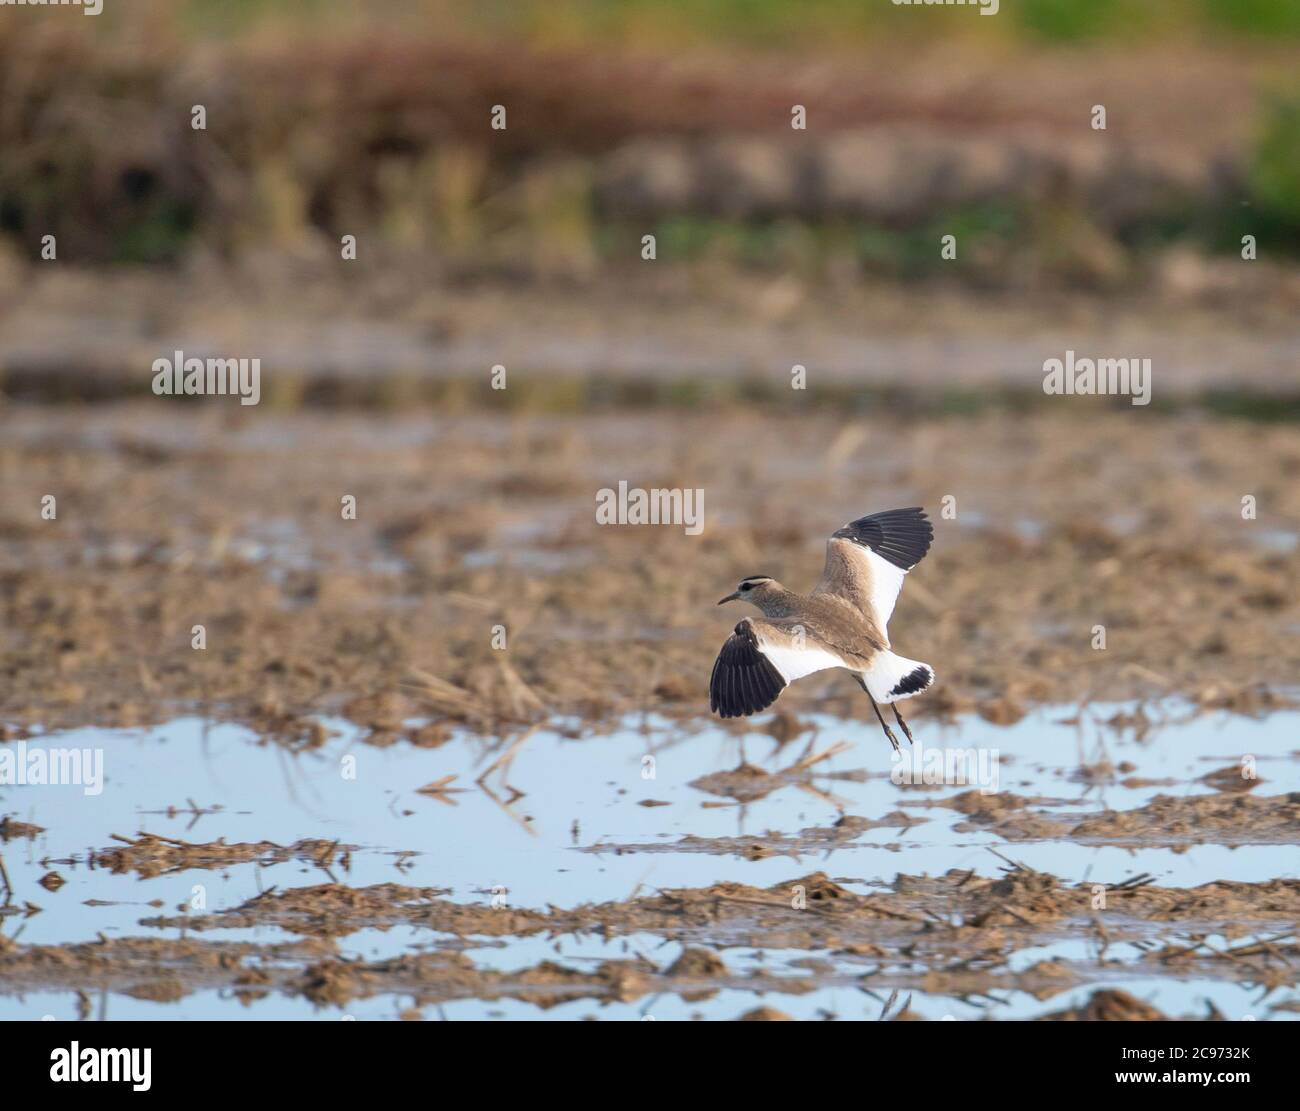 sociable plover (Chettusia gregaria, Vanellus gregarius), First-winter Sociable Lapwing flying over fields in Ebro Delta, going to land on wet agricultural field, Spain, Tarragona Stock Photo